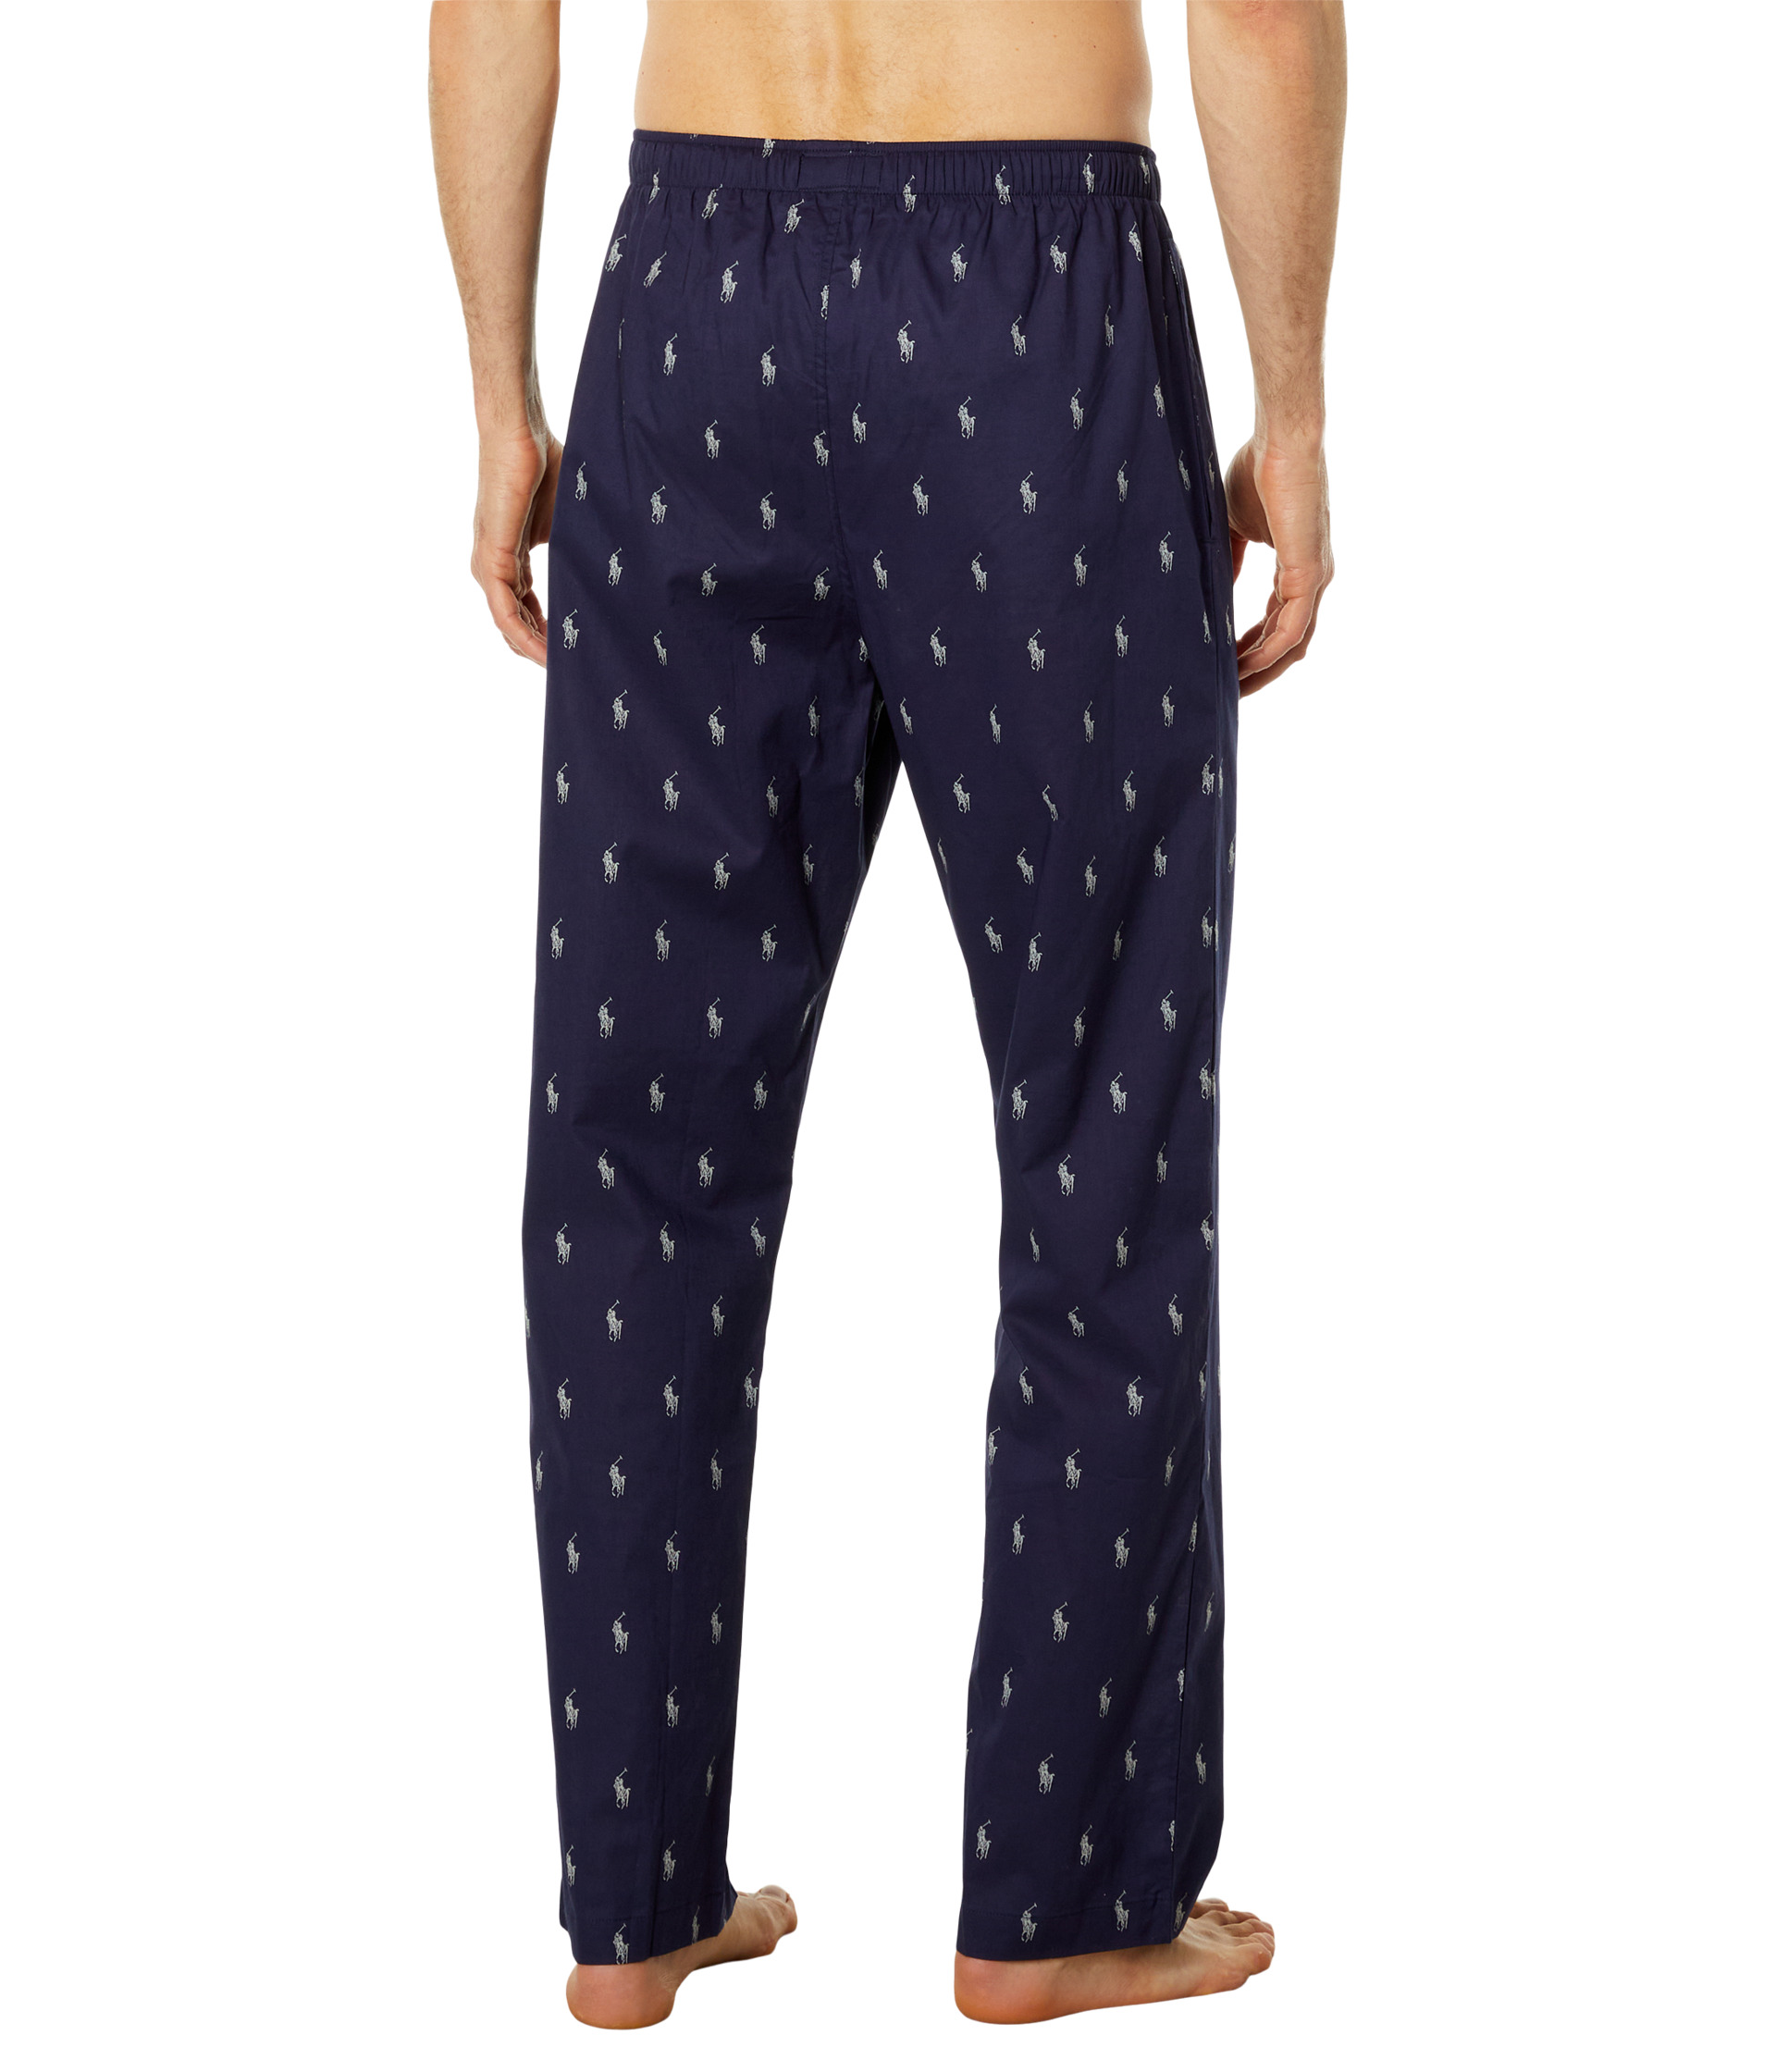 Polo Ralph Lauren All Over Pony Player Woven Pants at Zappos.com